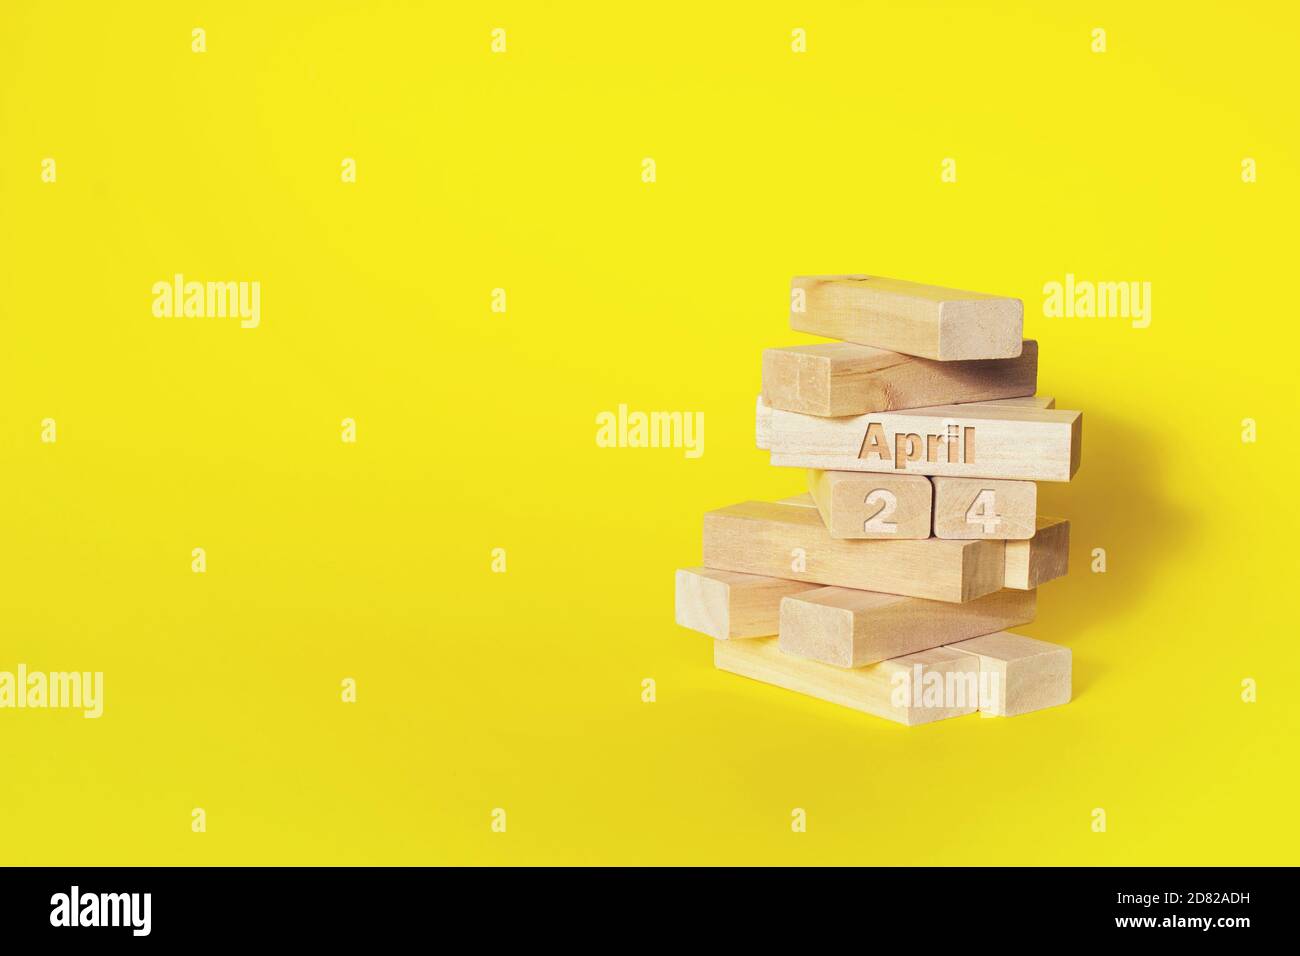 April 24th. Day 24 of month, Calendar date. Wooden blocks folded into the tower with month and day on yellow background, with copy space. Spring month Stock Photo